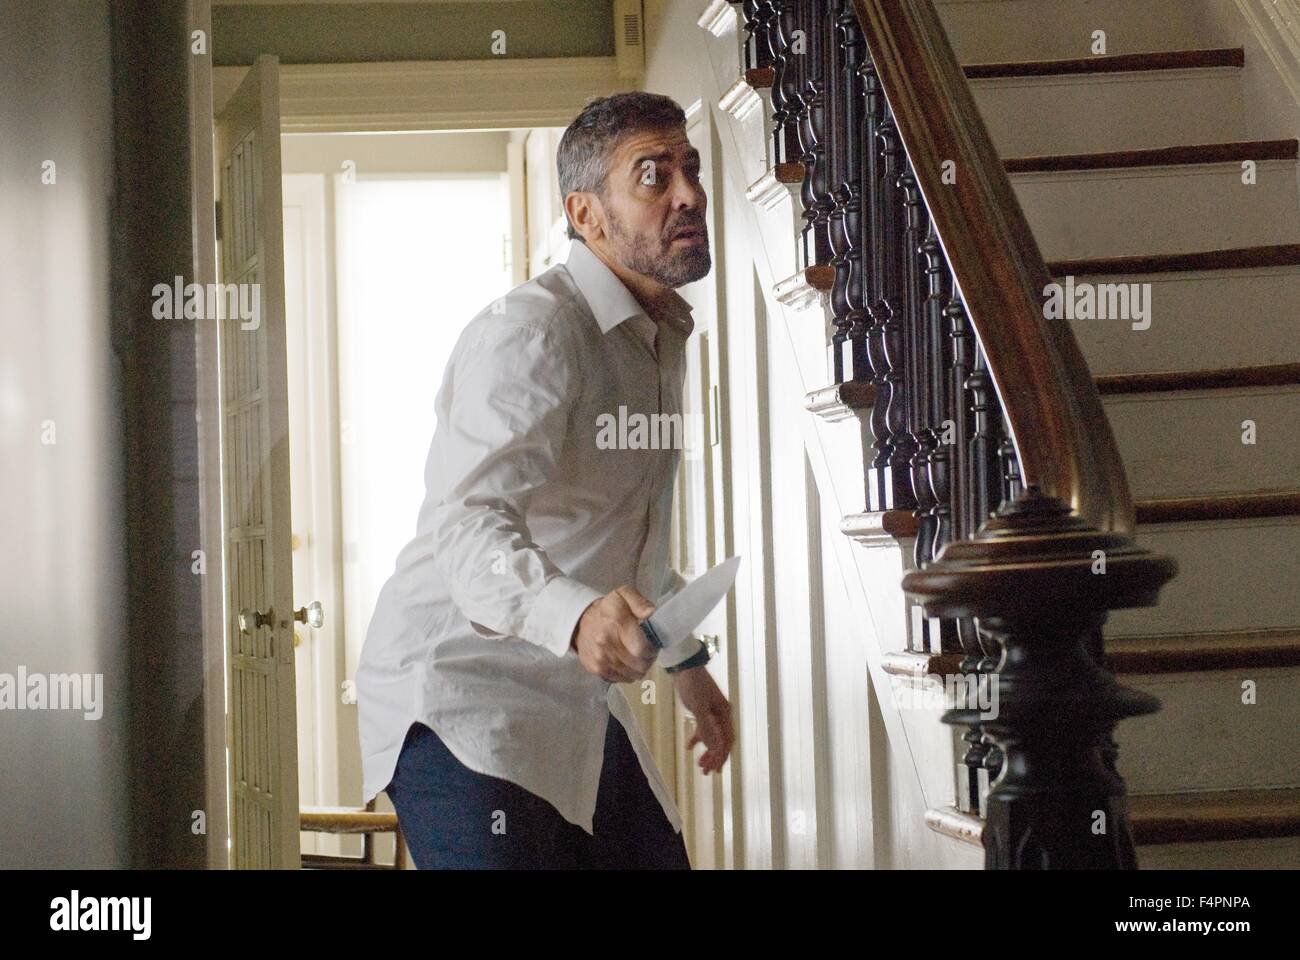 George Clooney / Burn After Reading / 2008 directed by Coen Brothers[Macall Polay /Focus Features / Universal Studios] Stock Photo